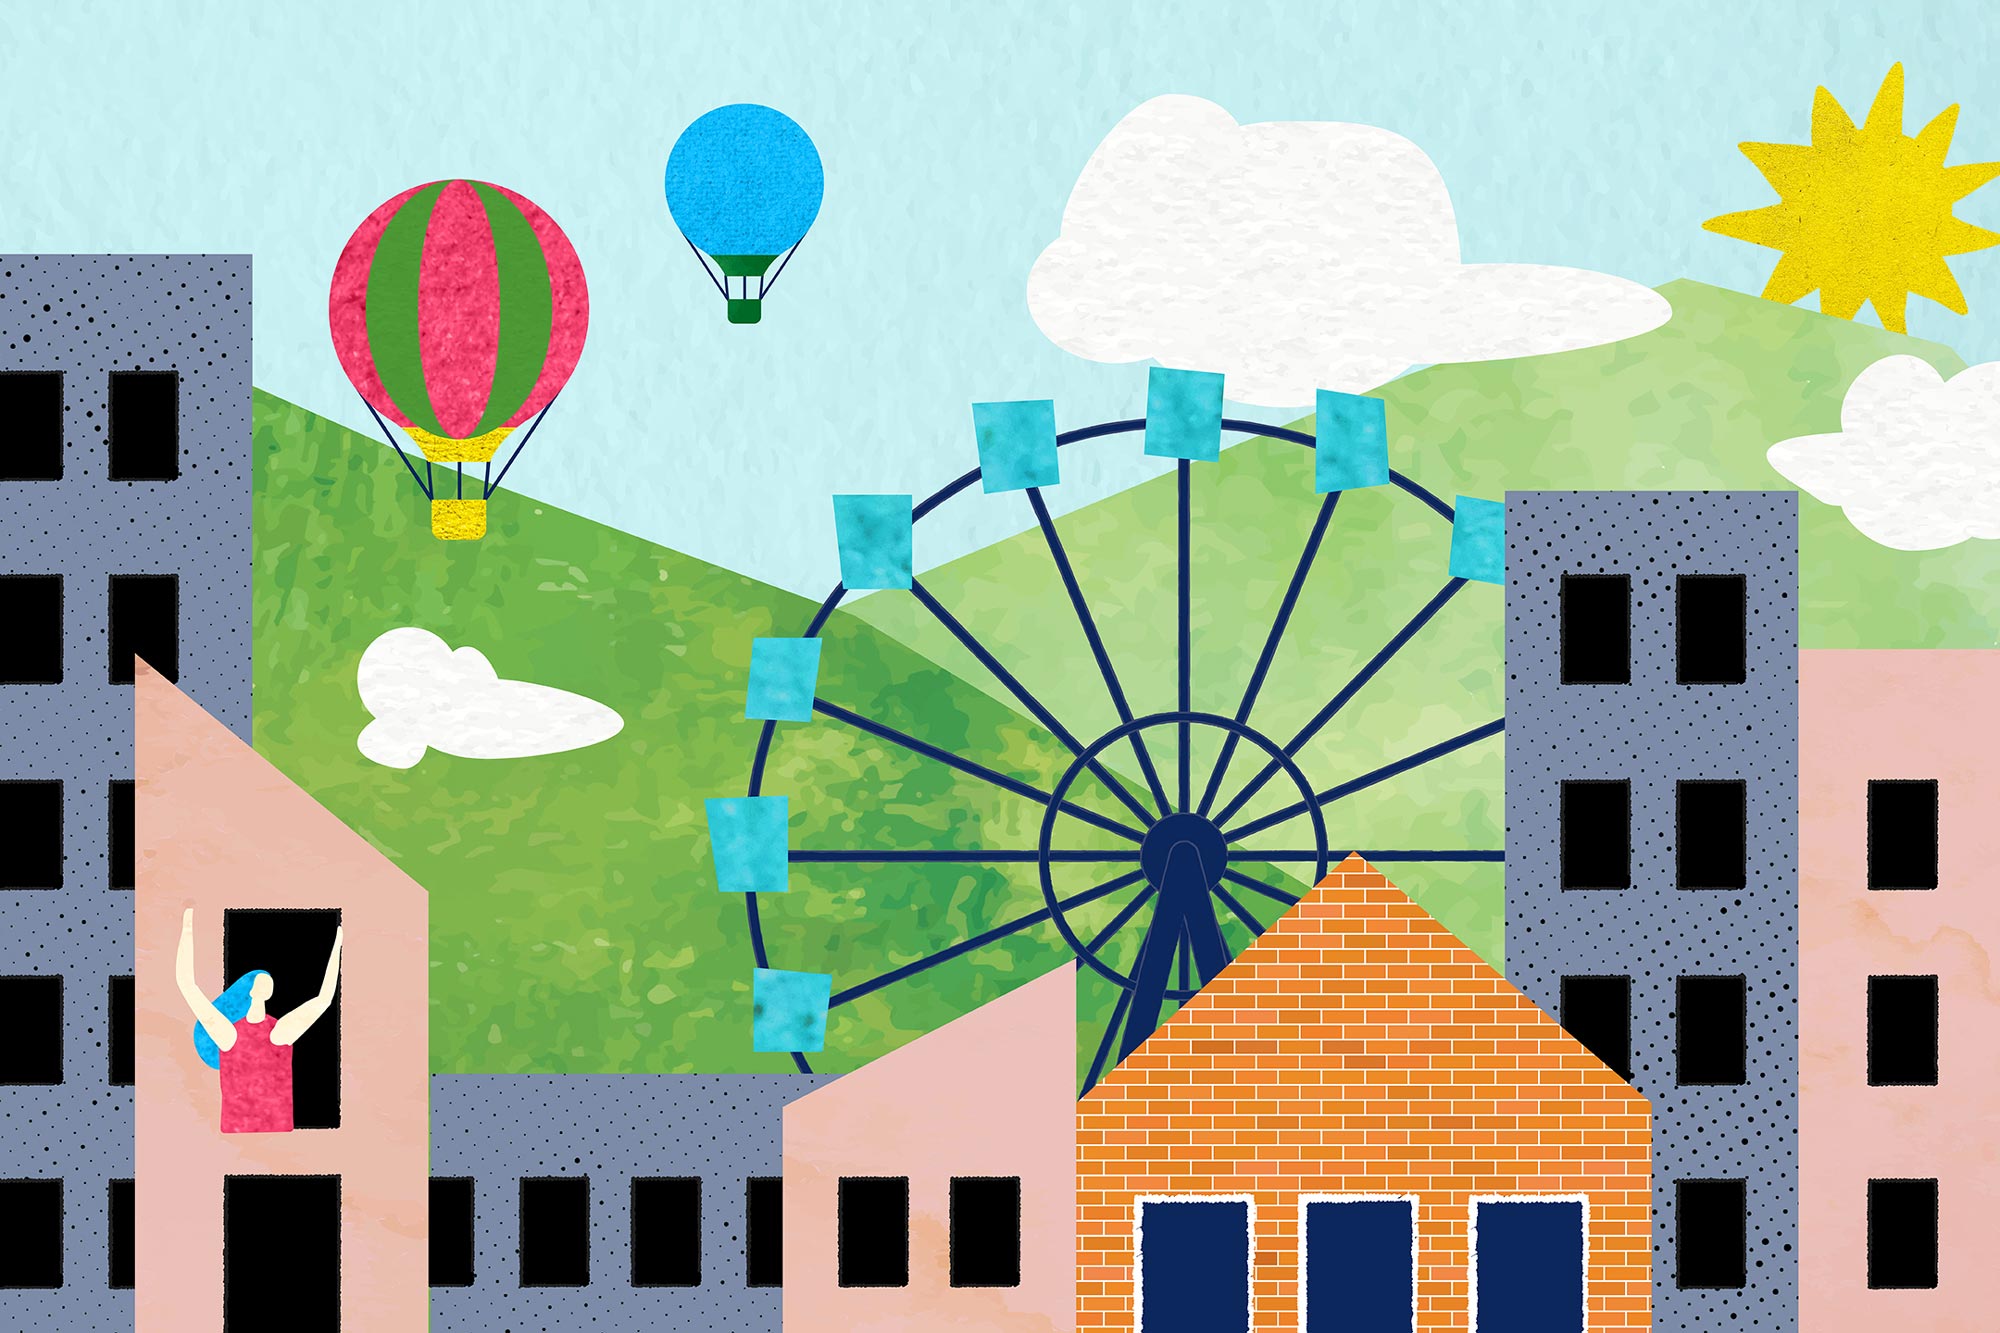 Illustration of a cityscape with hot air balloons, clouds, ferris wheel, and a woman waiving out of a building window